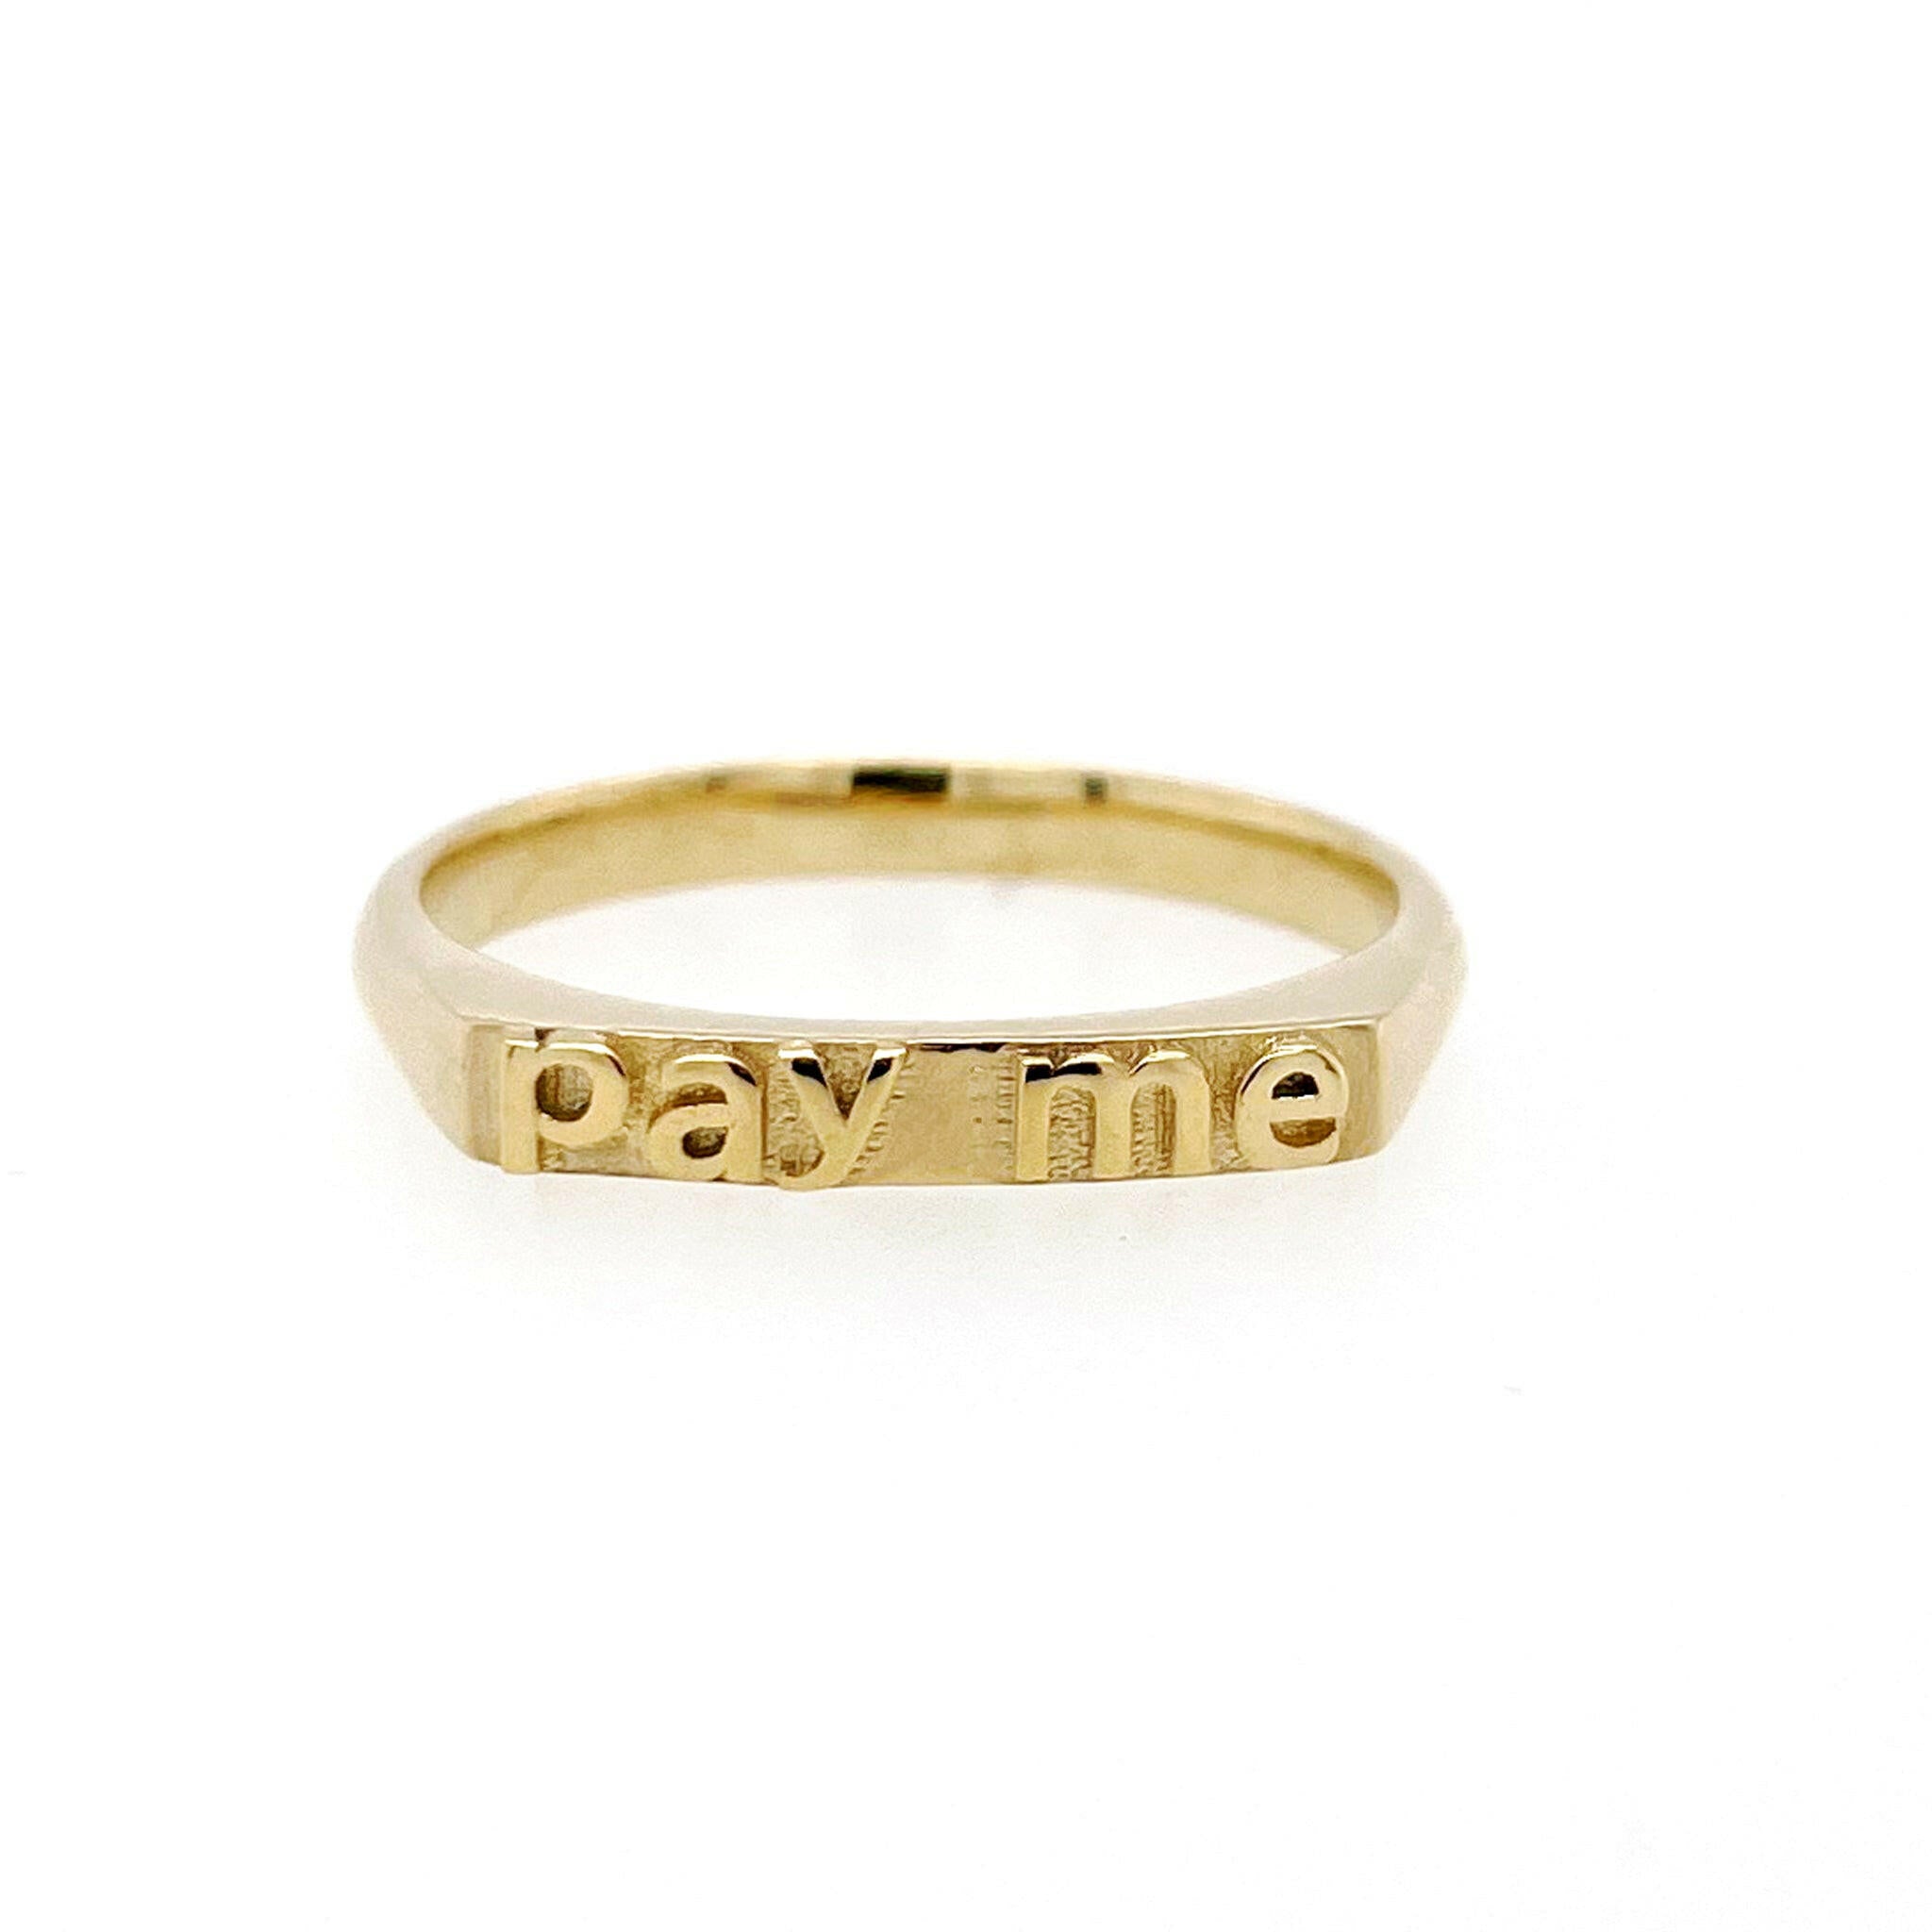 front view of  14 karat yellow gold with text that reads "pay me"